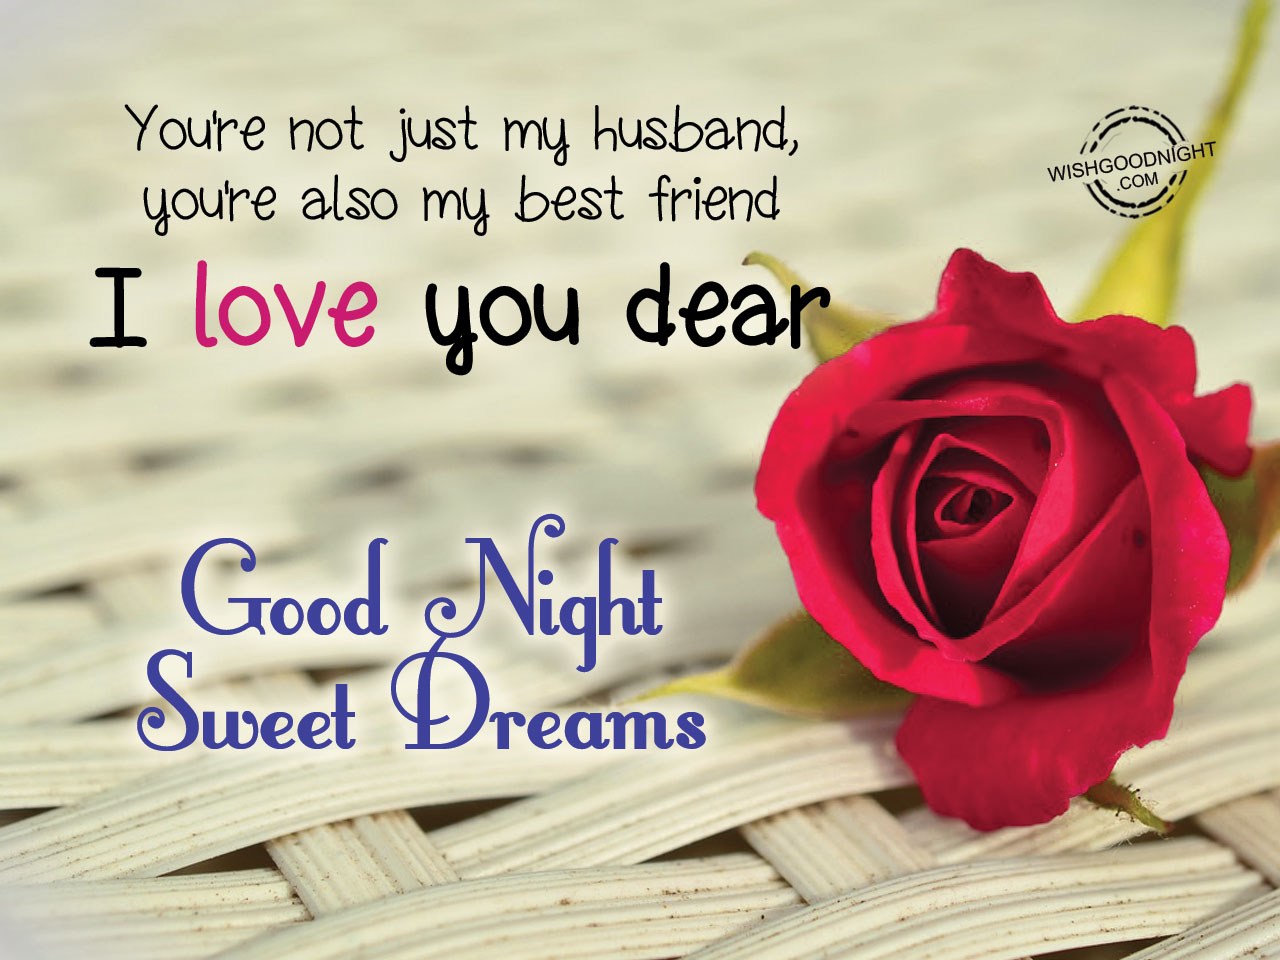 Good Night Wishes For Husband - Good Night Wishes - Inspirational ...